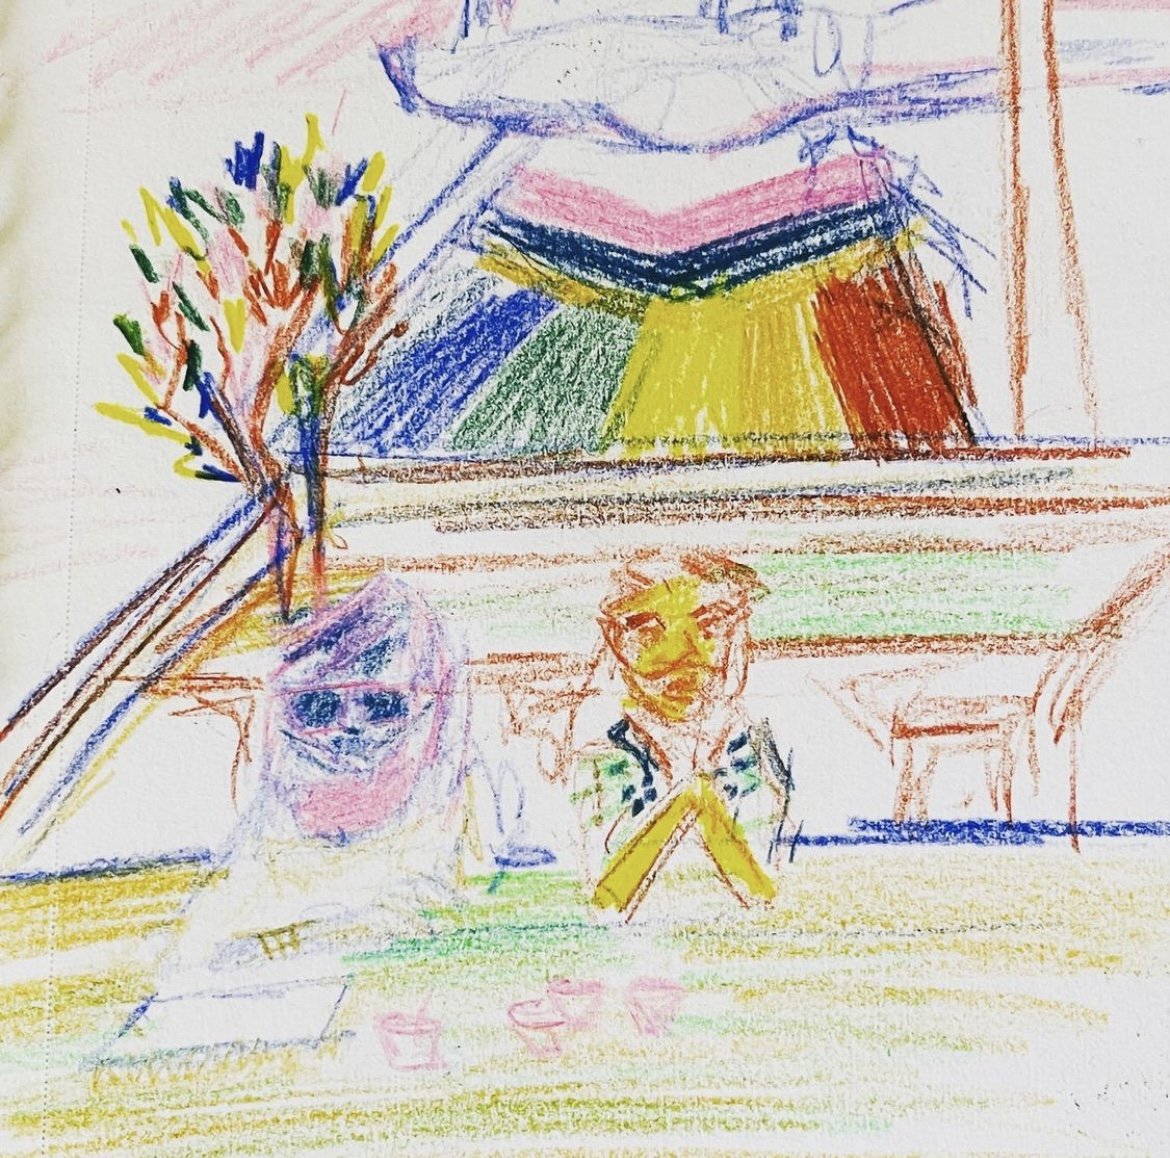 Sketch from Tour of LGBTQ+ Sites in L.A. 